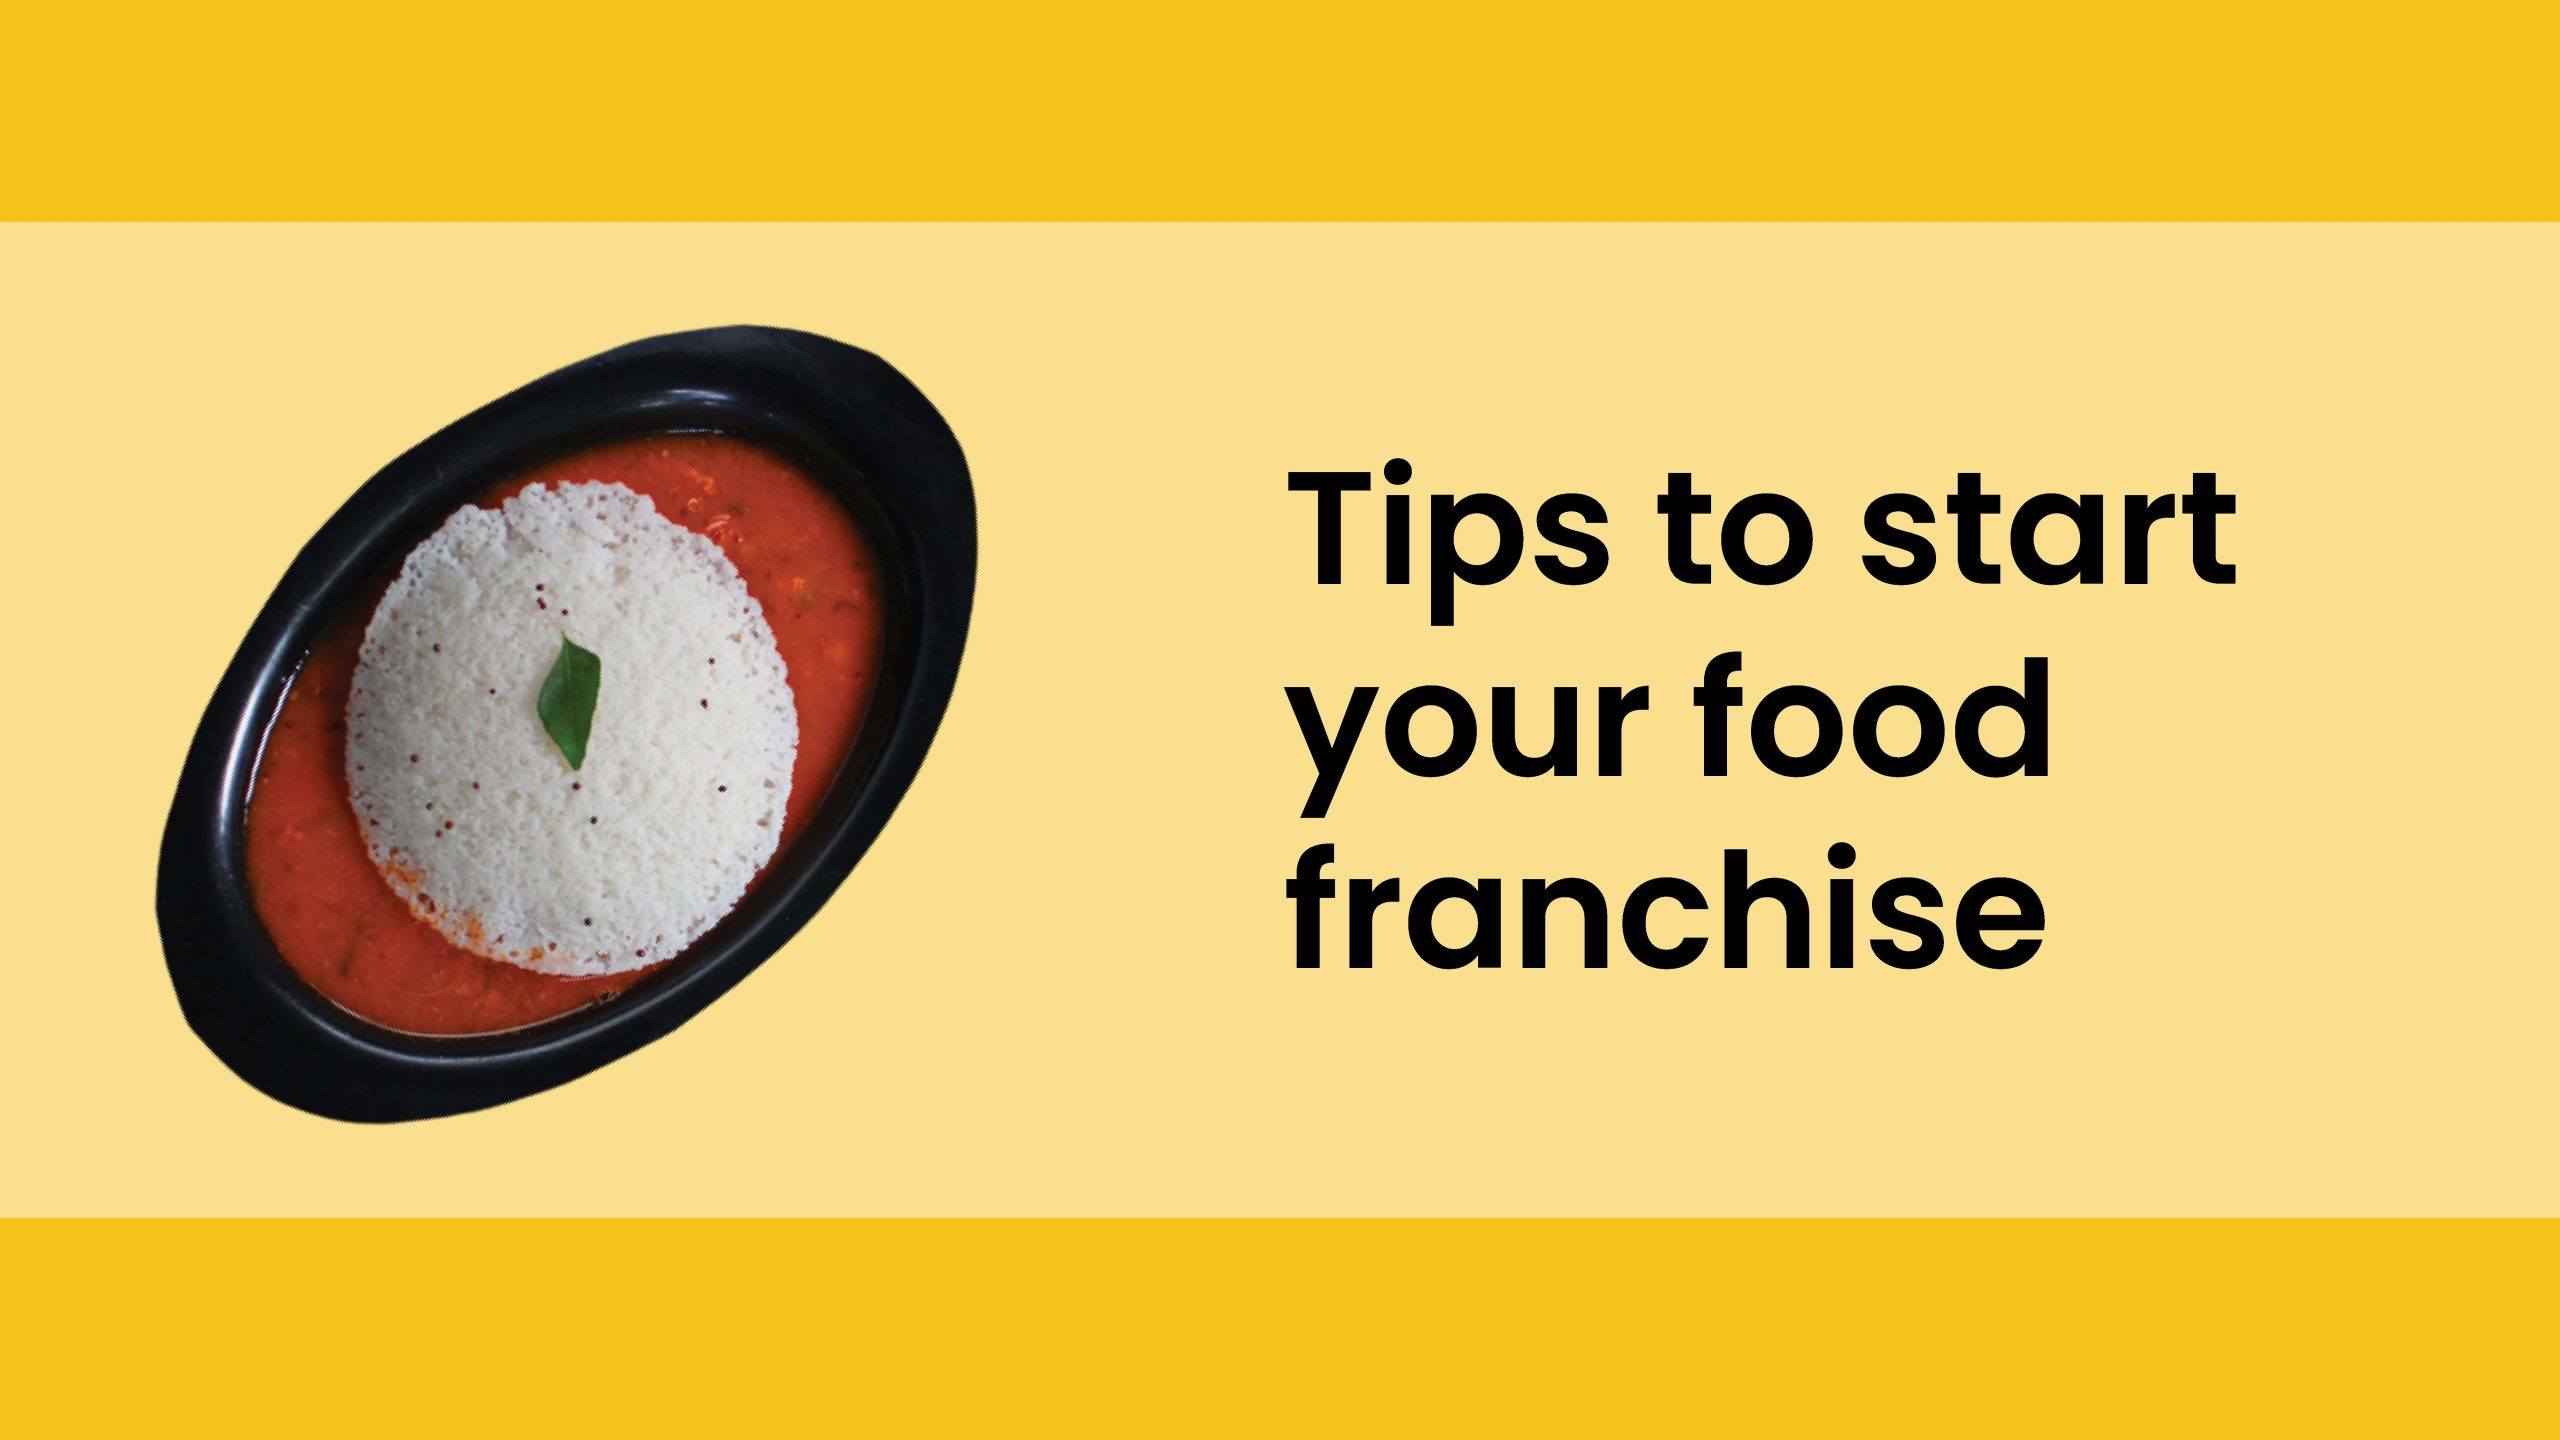 Tips for starting a food franchise for the first time